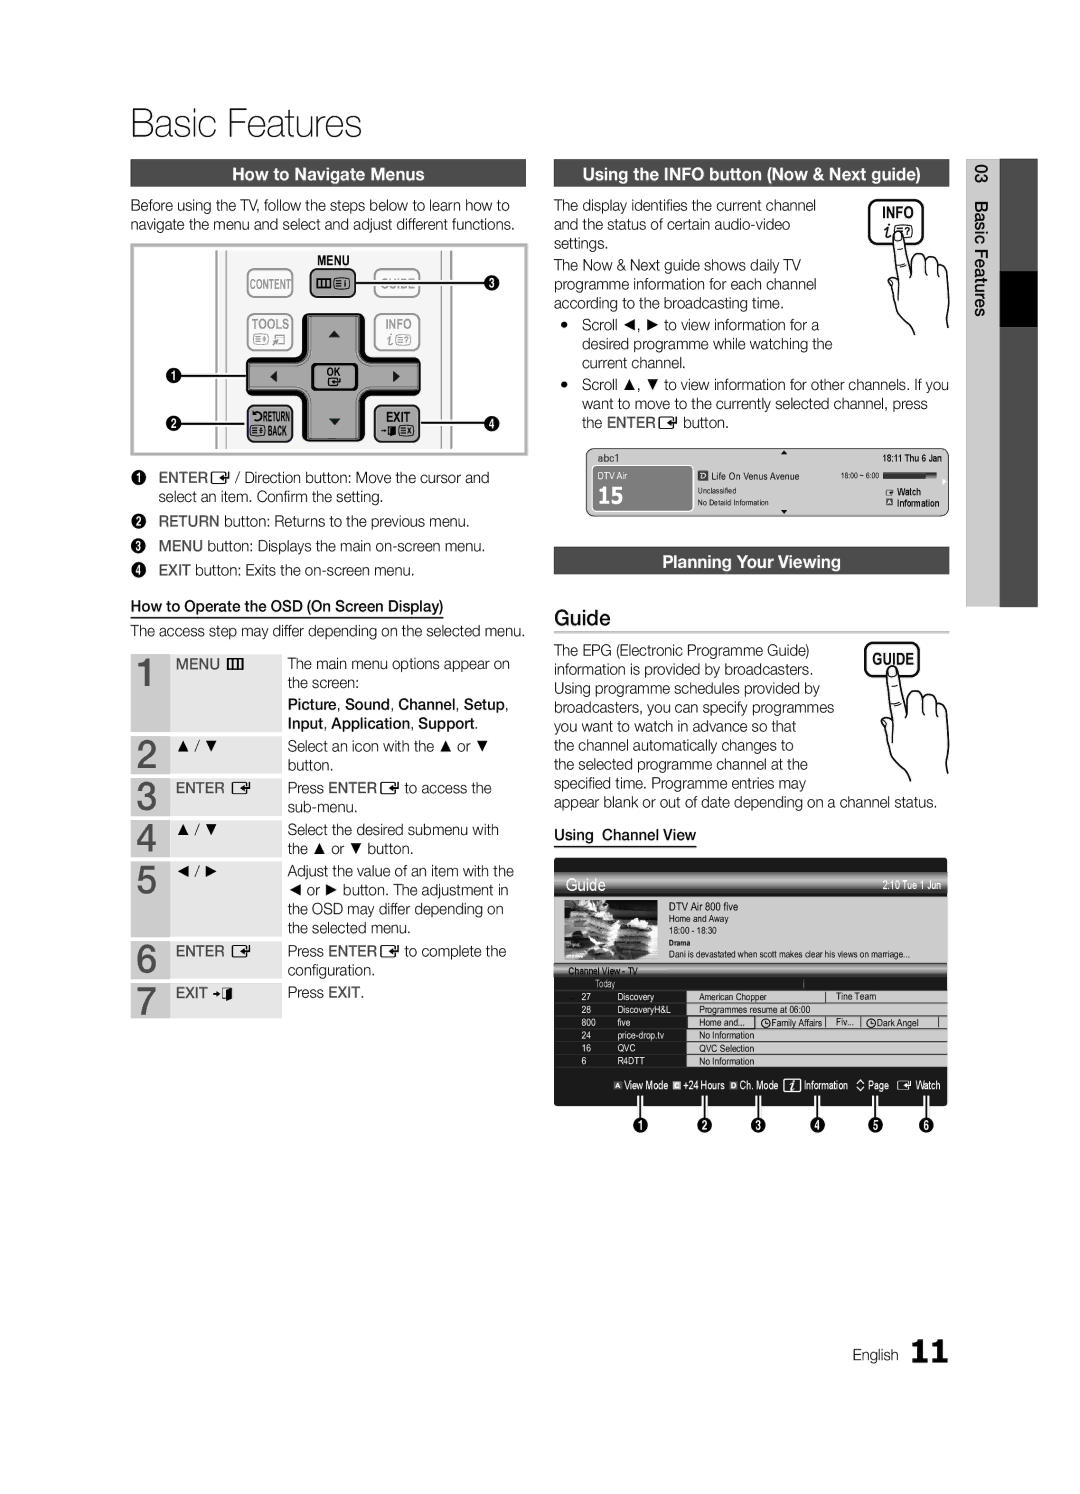 Samsung UE32C6500UPXZT manual Basic Features, Guide, How to Navigate Menus, Using the Info button Now & Next guide 